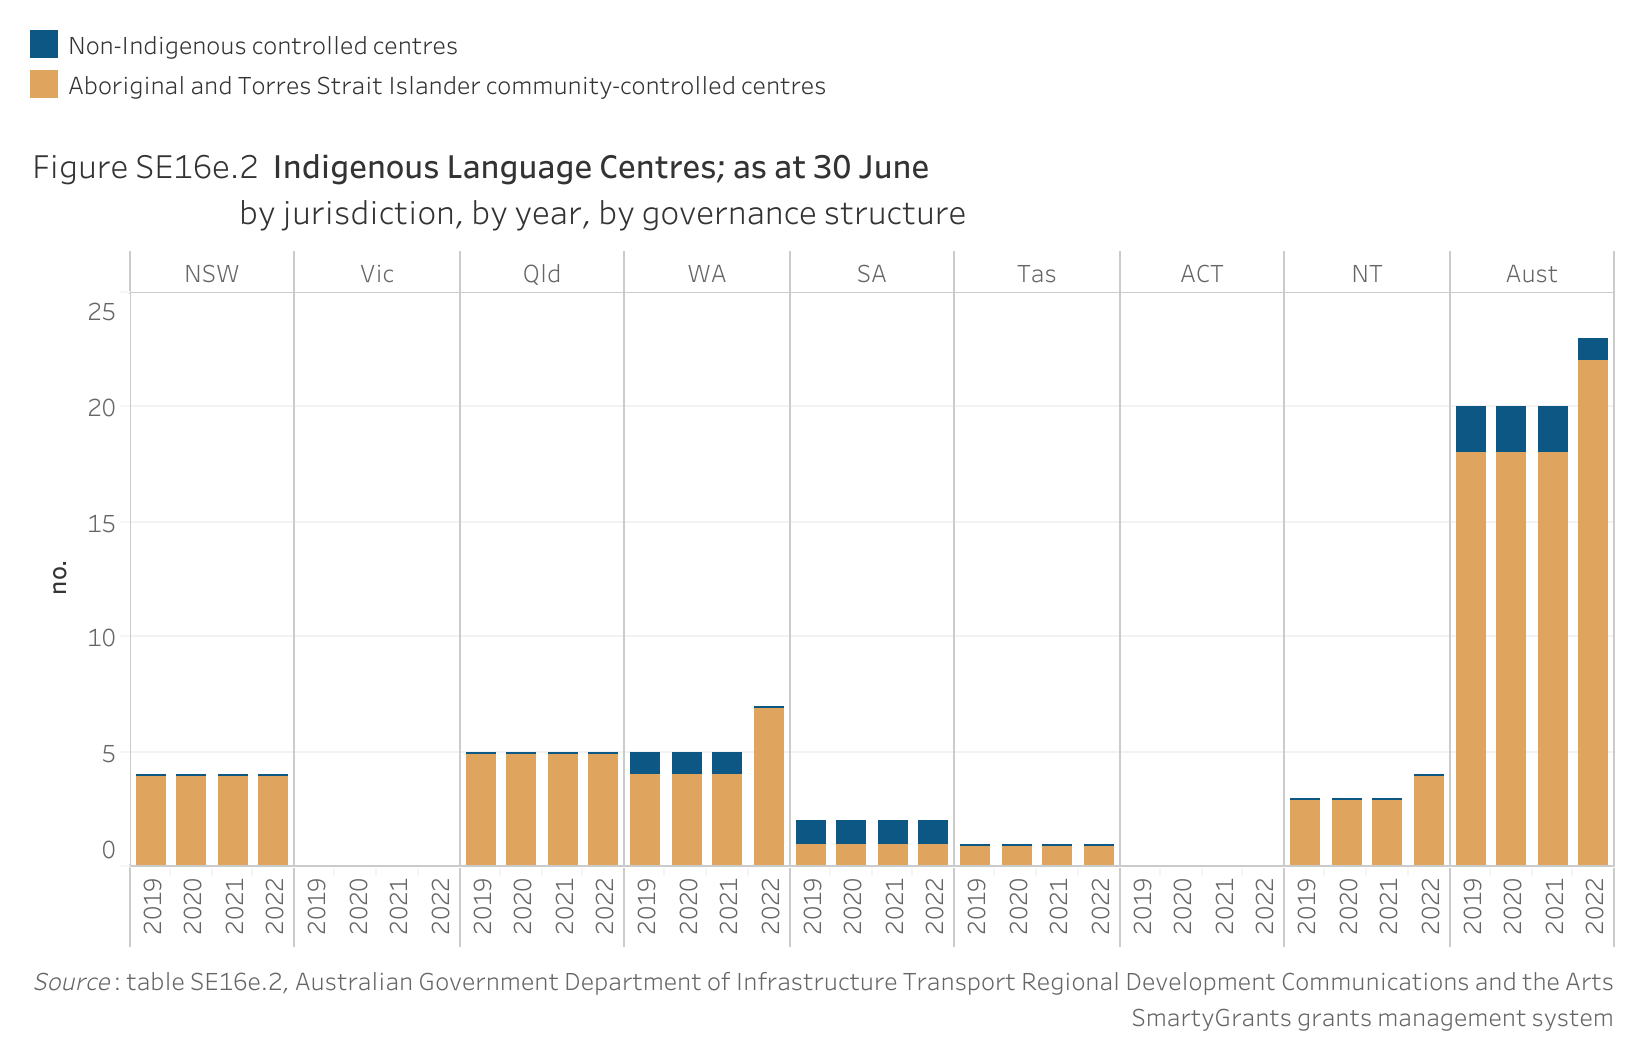 Figure SE16e.2 shows Indigenous Language Centres, as at 30 June, by jurisdiction, by year, by governance structure. More details can be found within the text near this image.